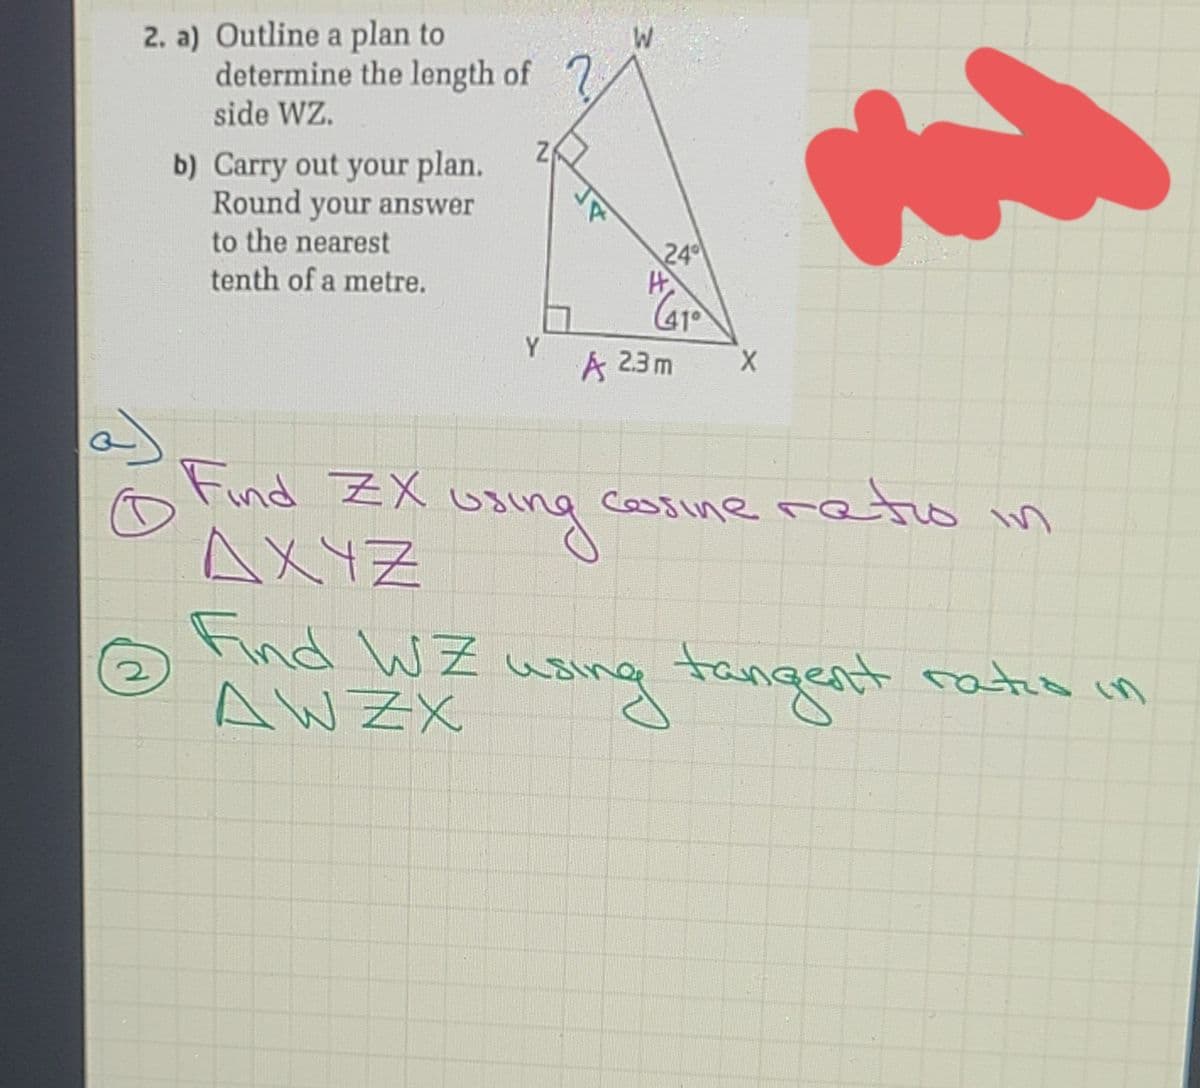 2. a) Outline a plan to
determine the length of
side WZ.
b) Carry out your plan.
Round your answer
to the nearest
tenth of a metre.
24
Y
A 23m
Find ZX u
uaing
AXYZ
cossine reto in
n
Find W Z
AW ZX
wsing tangent ratio in
